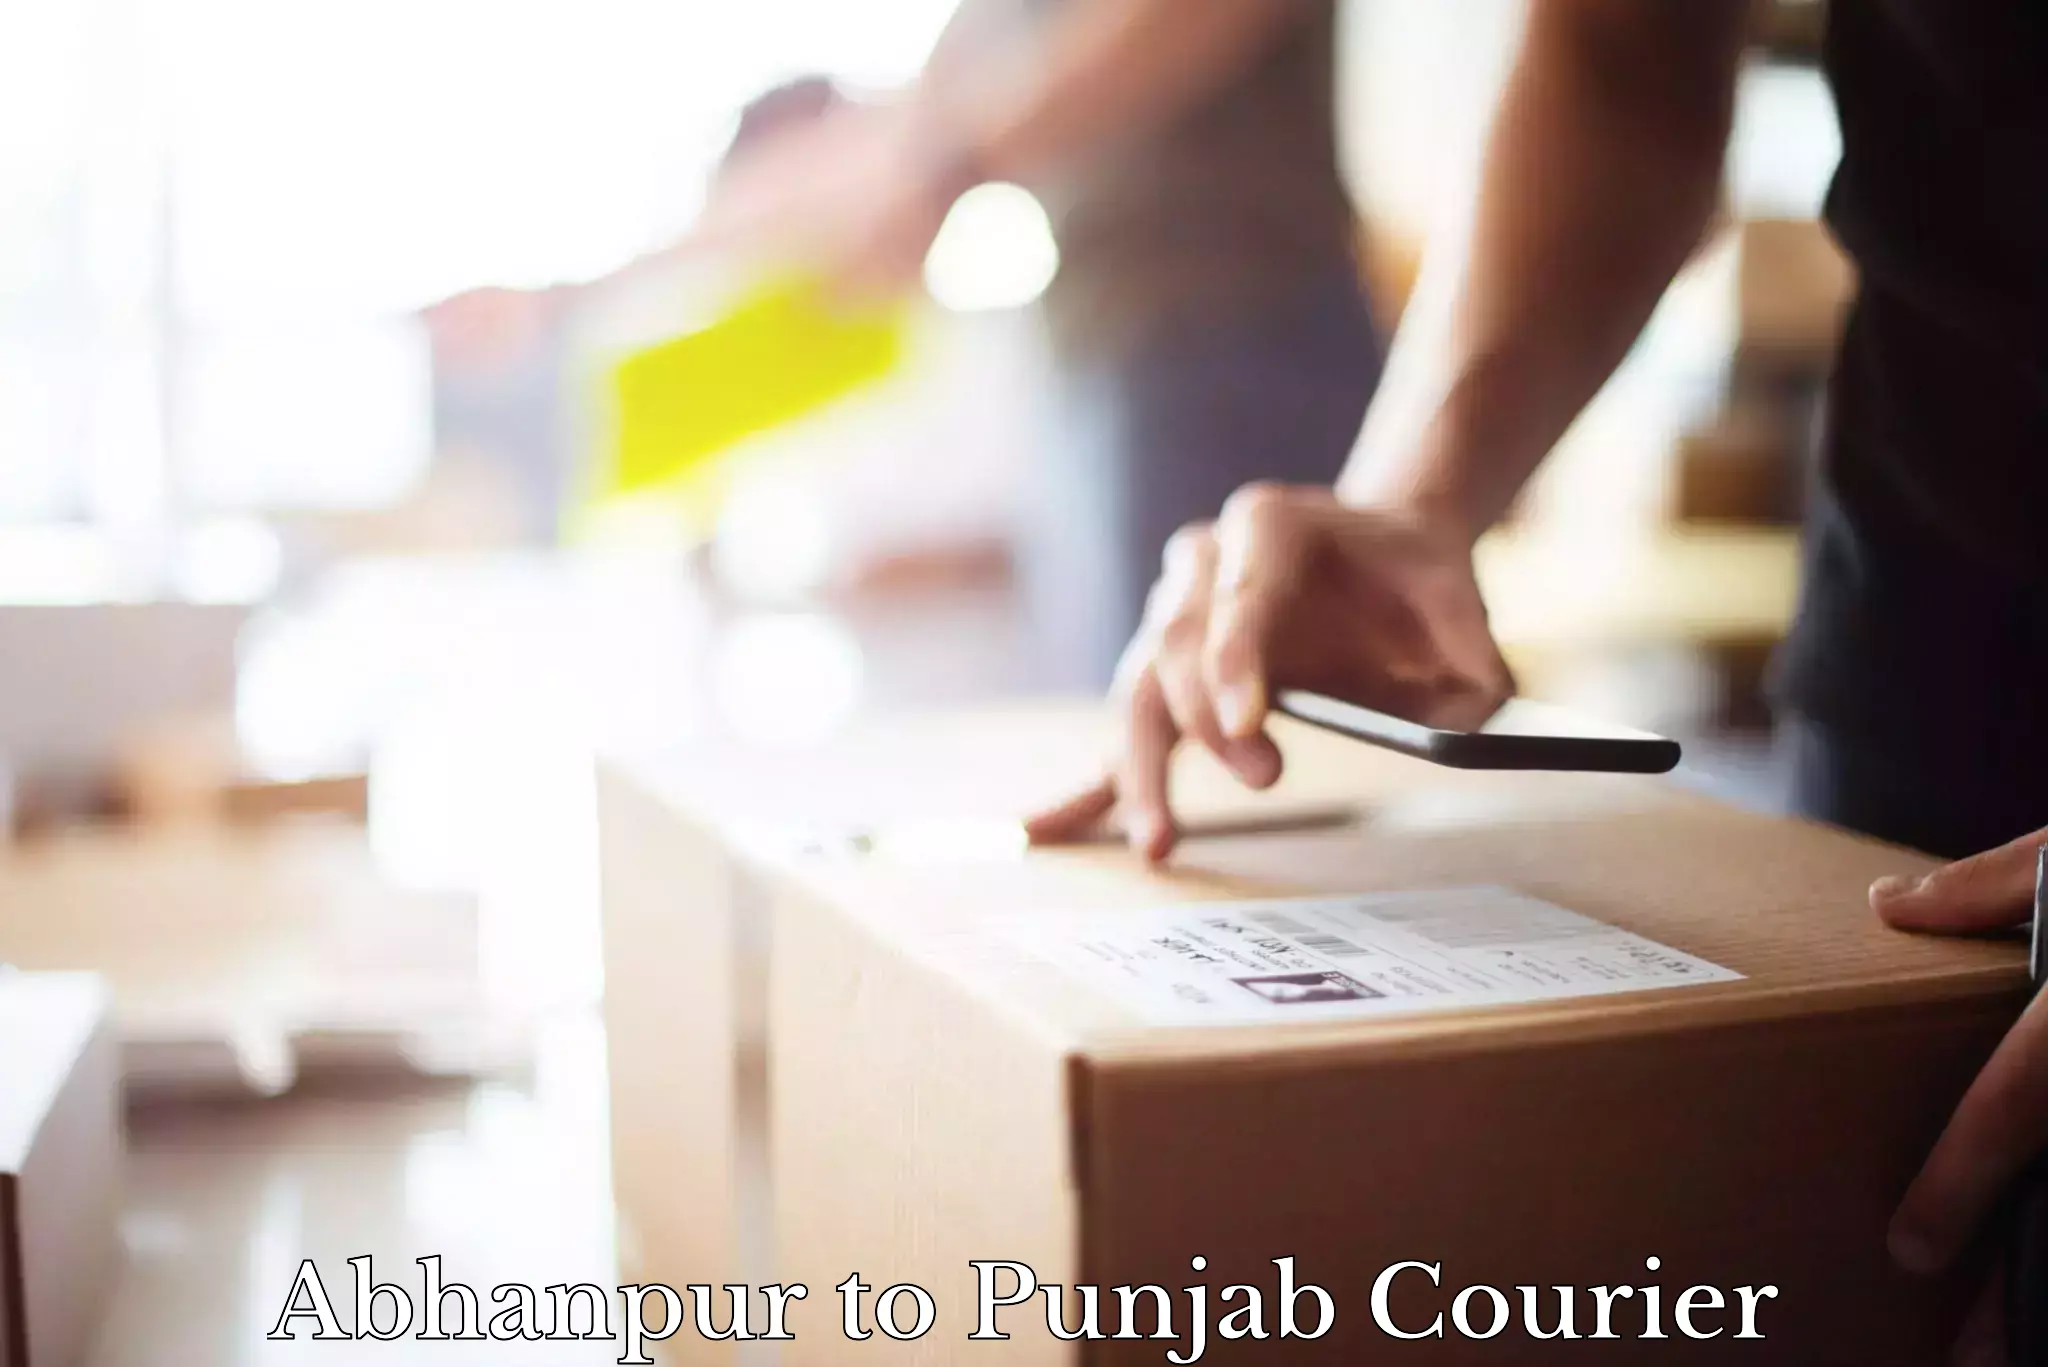 On-call courier service Abhanpur to Punjab